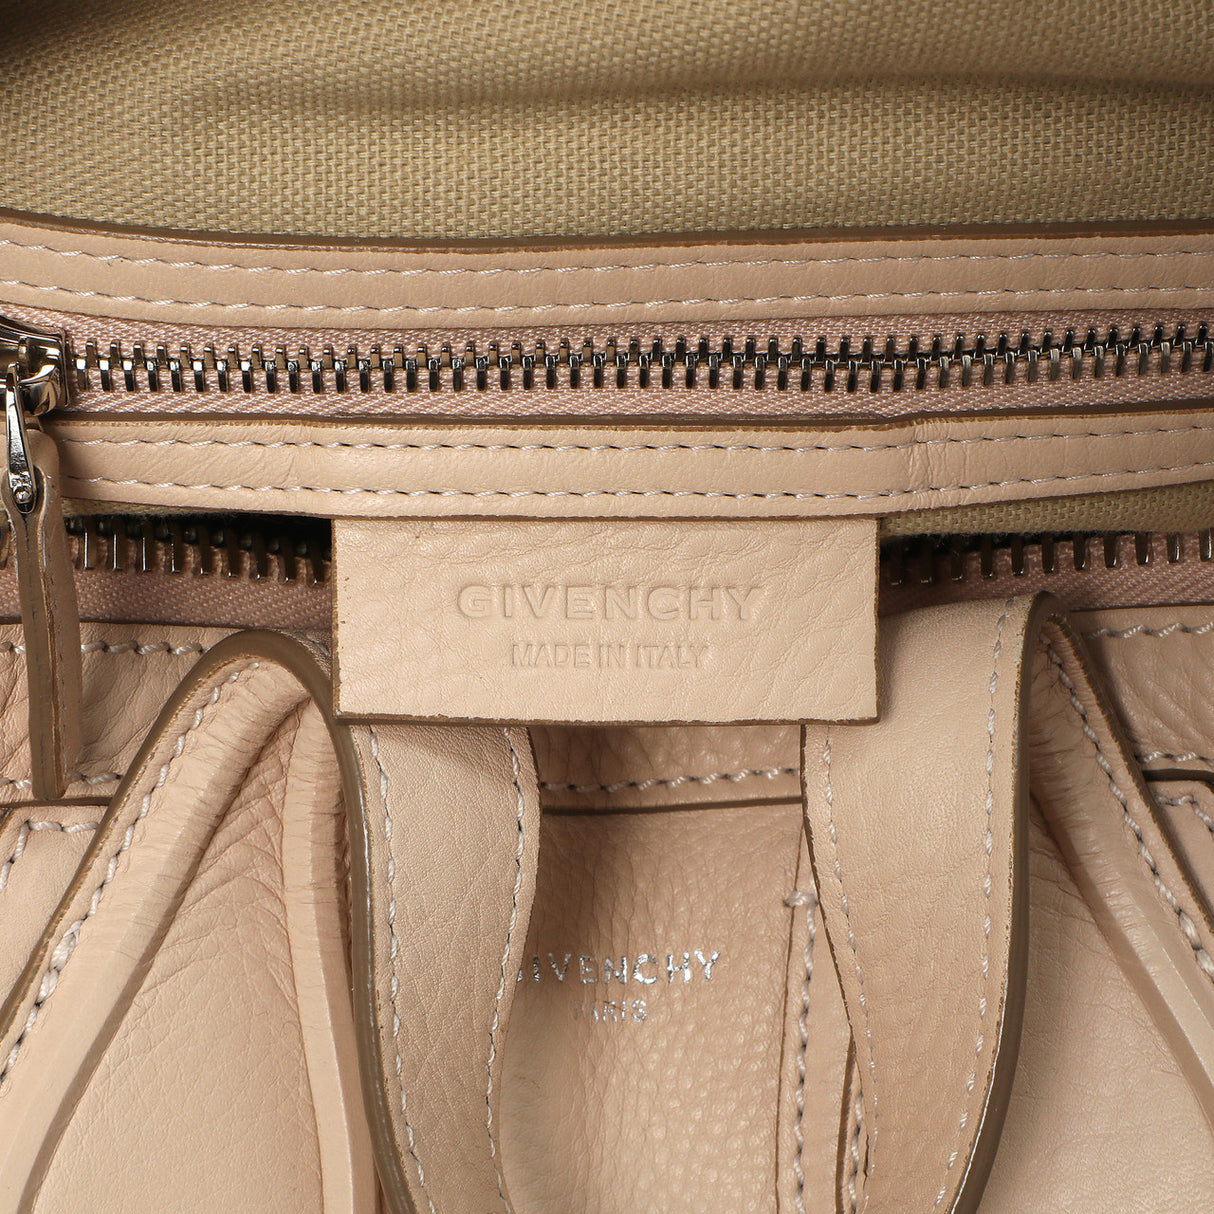 Givenchy Beige Calfskin Small Nightingale